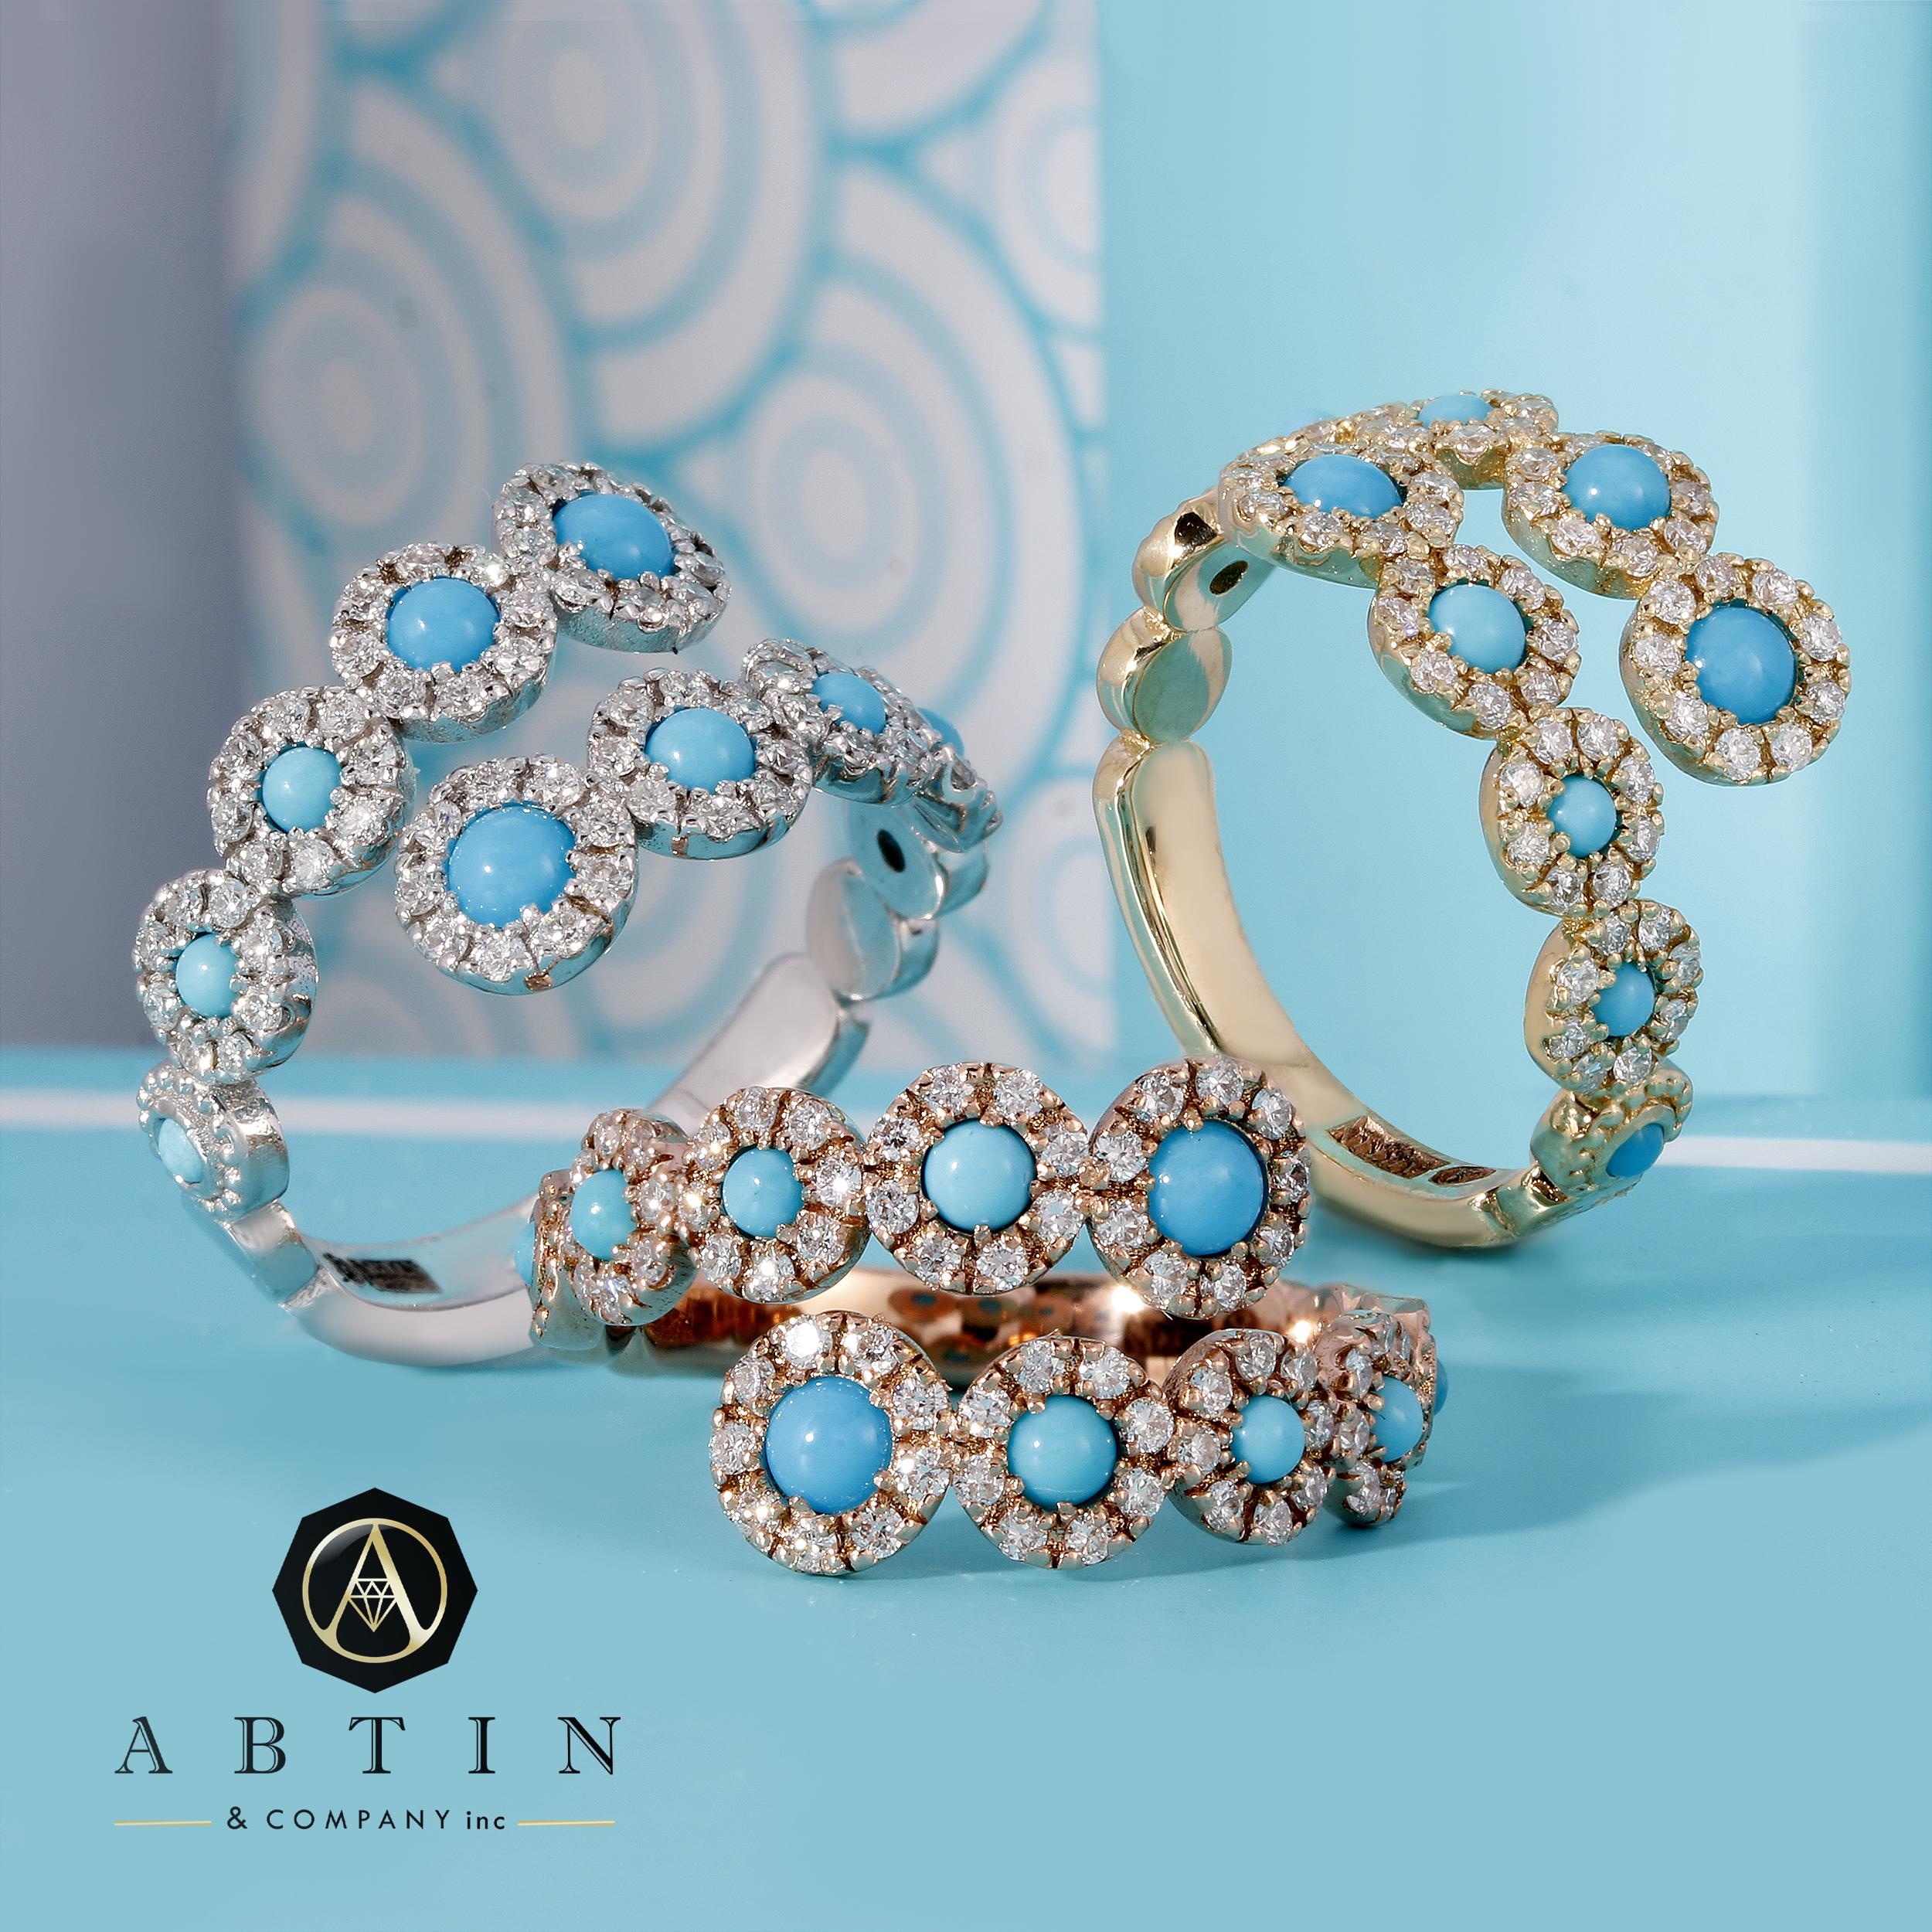 Crafted in 14K gold, this elegant bypass ring features shimmering round diamonds and captivating genuine turquoise stones. Turquoise stones are known for bringing good fortune making them invulnerable. If you like one-of-a-kind jewelry this ring is